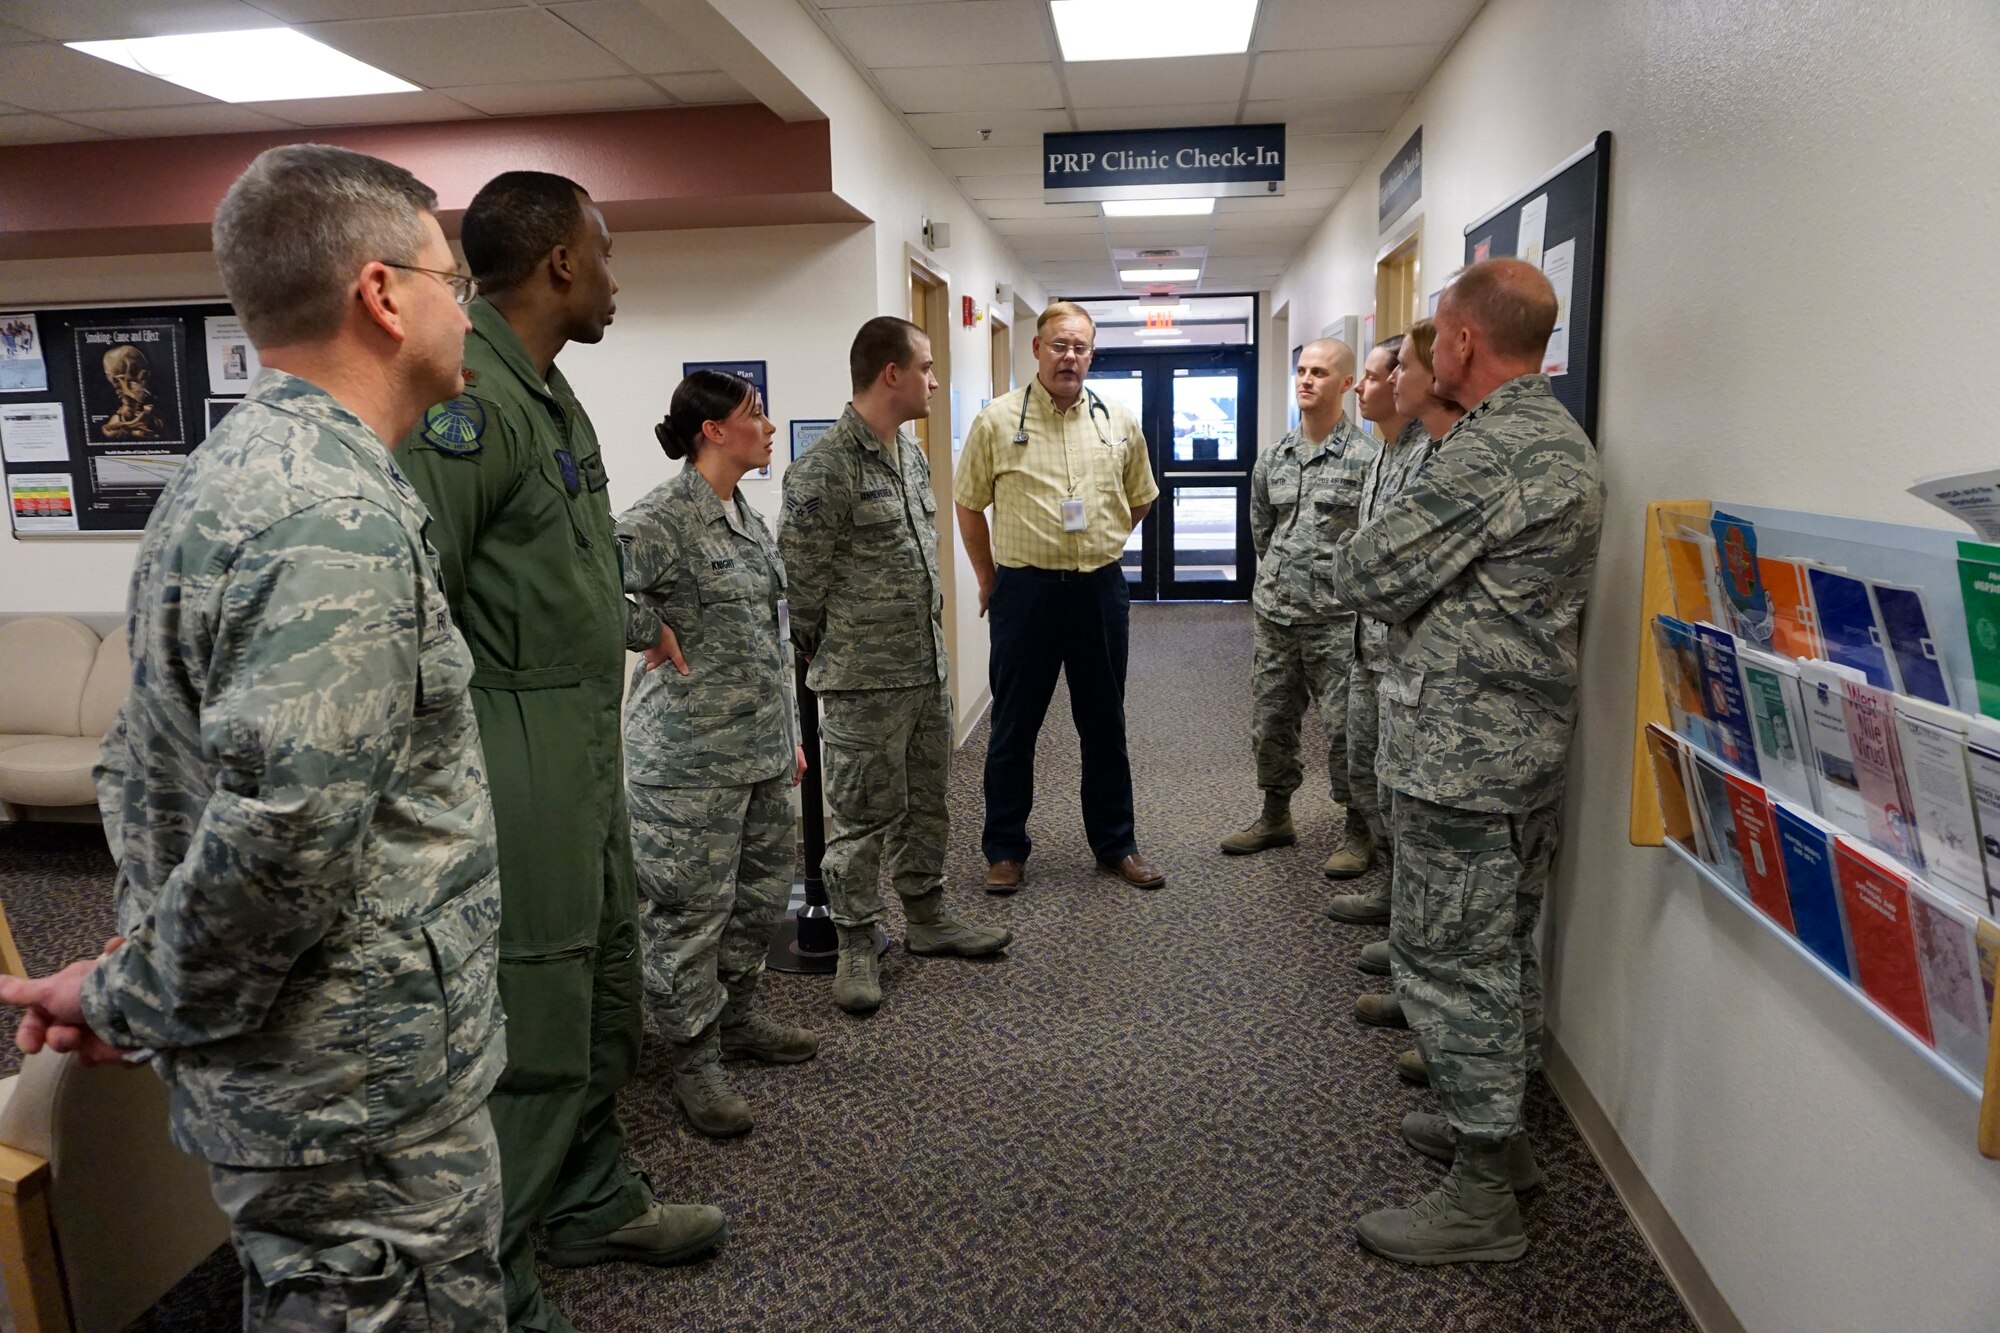 Lt. Gen. Stephen Wilson, Air Force Global Strike Command commander, meets with Airmen assigned to the Personal Reliability Program Clinic at the Medical Treatment Facility on F.E. Warren Air Force Base, Dec. 10, 2014. Airmen on PRP now have less follow-up appointments after off-base treatment thanks to the Force Improvement Program, which results in less time spent away from the mission. Portions of this image have been blurred for security reasons. (U.S. Air Force Photo/Lan Kim)